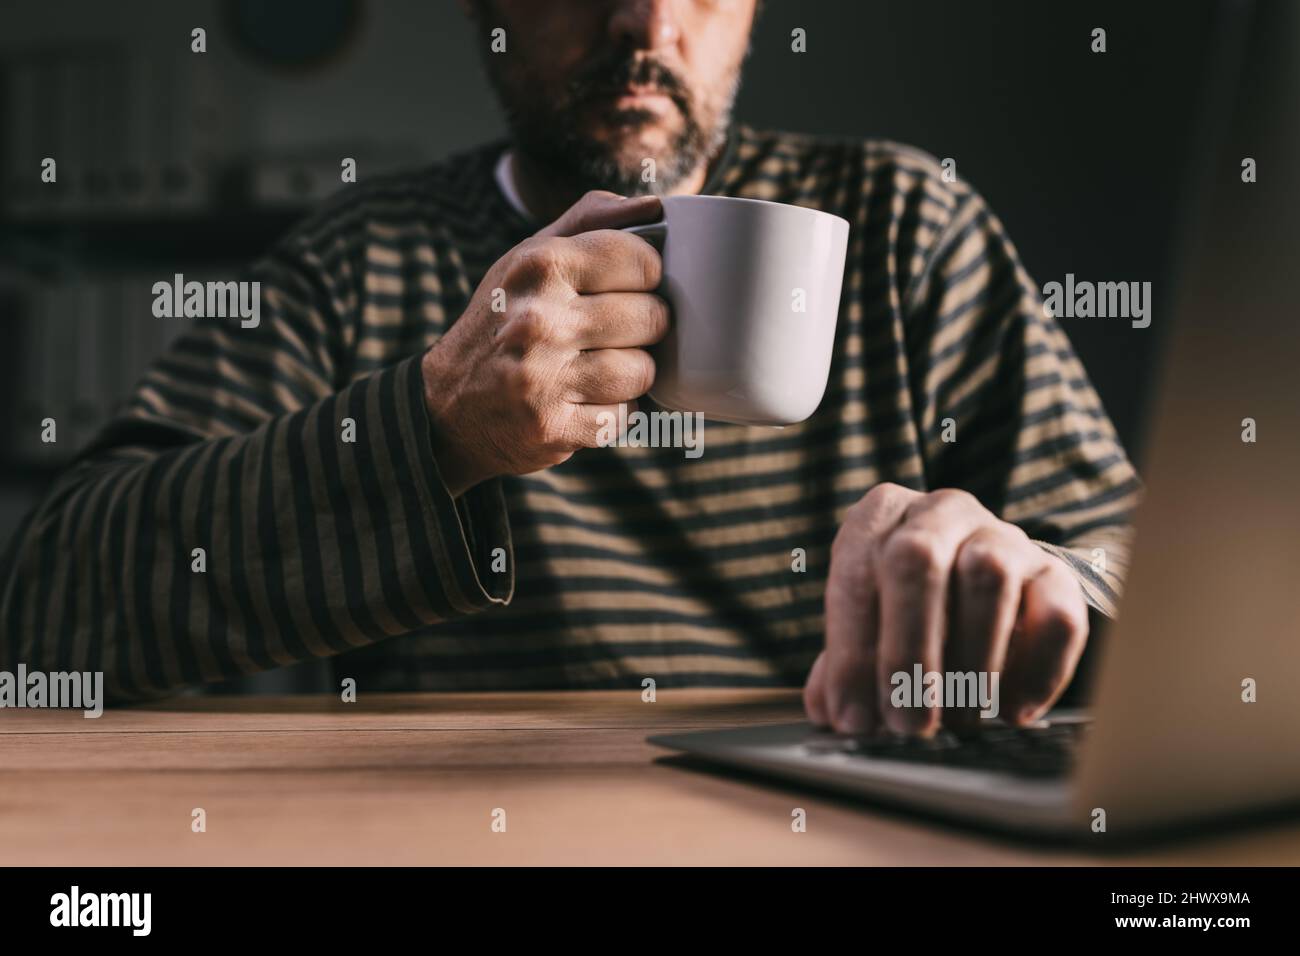 Self-employed freelancer working on laptop computer in home office late at night and drinking coffee to stay awake, selective focus Stock Photo